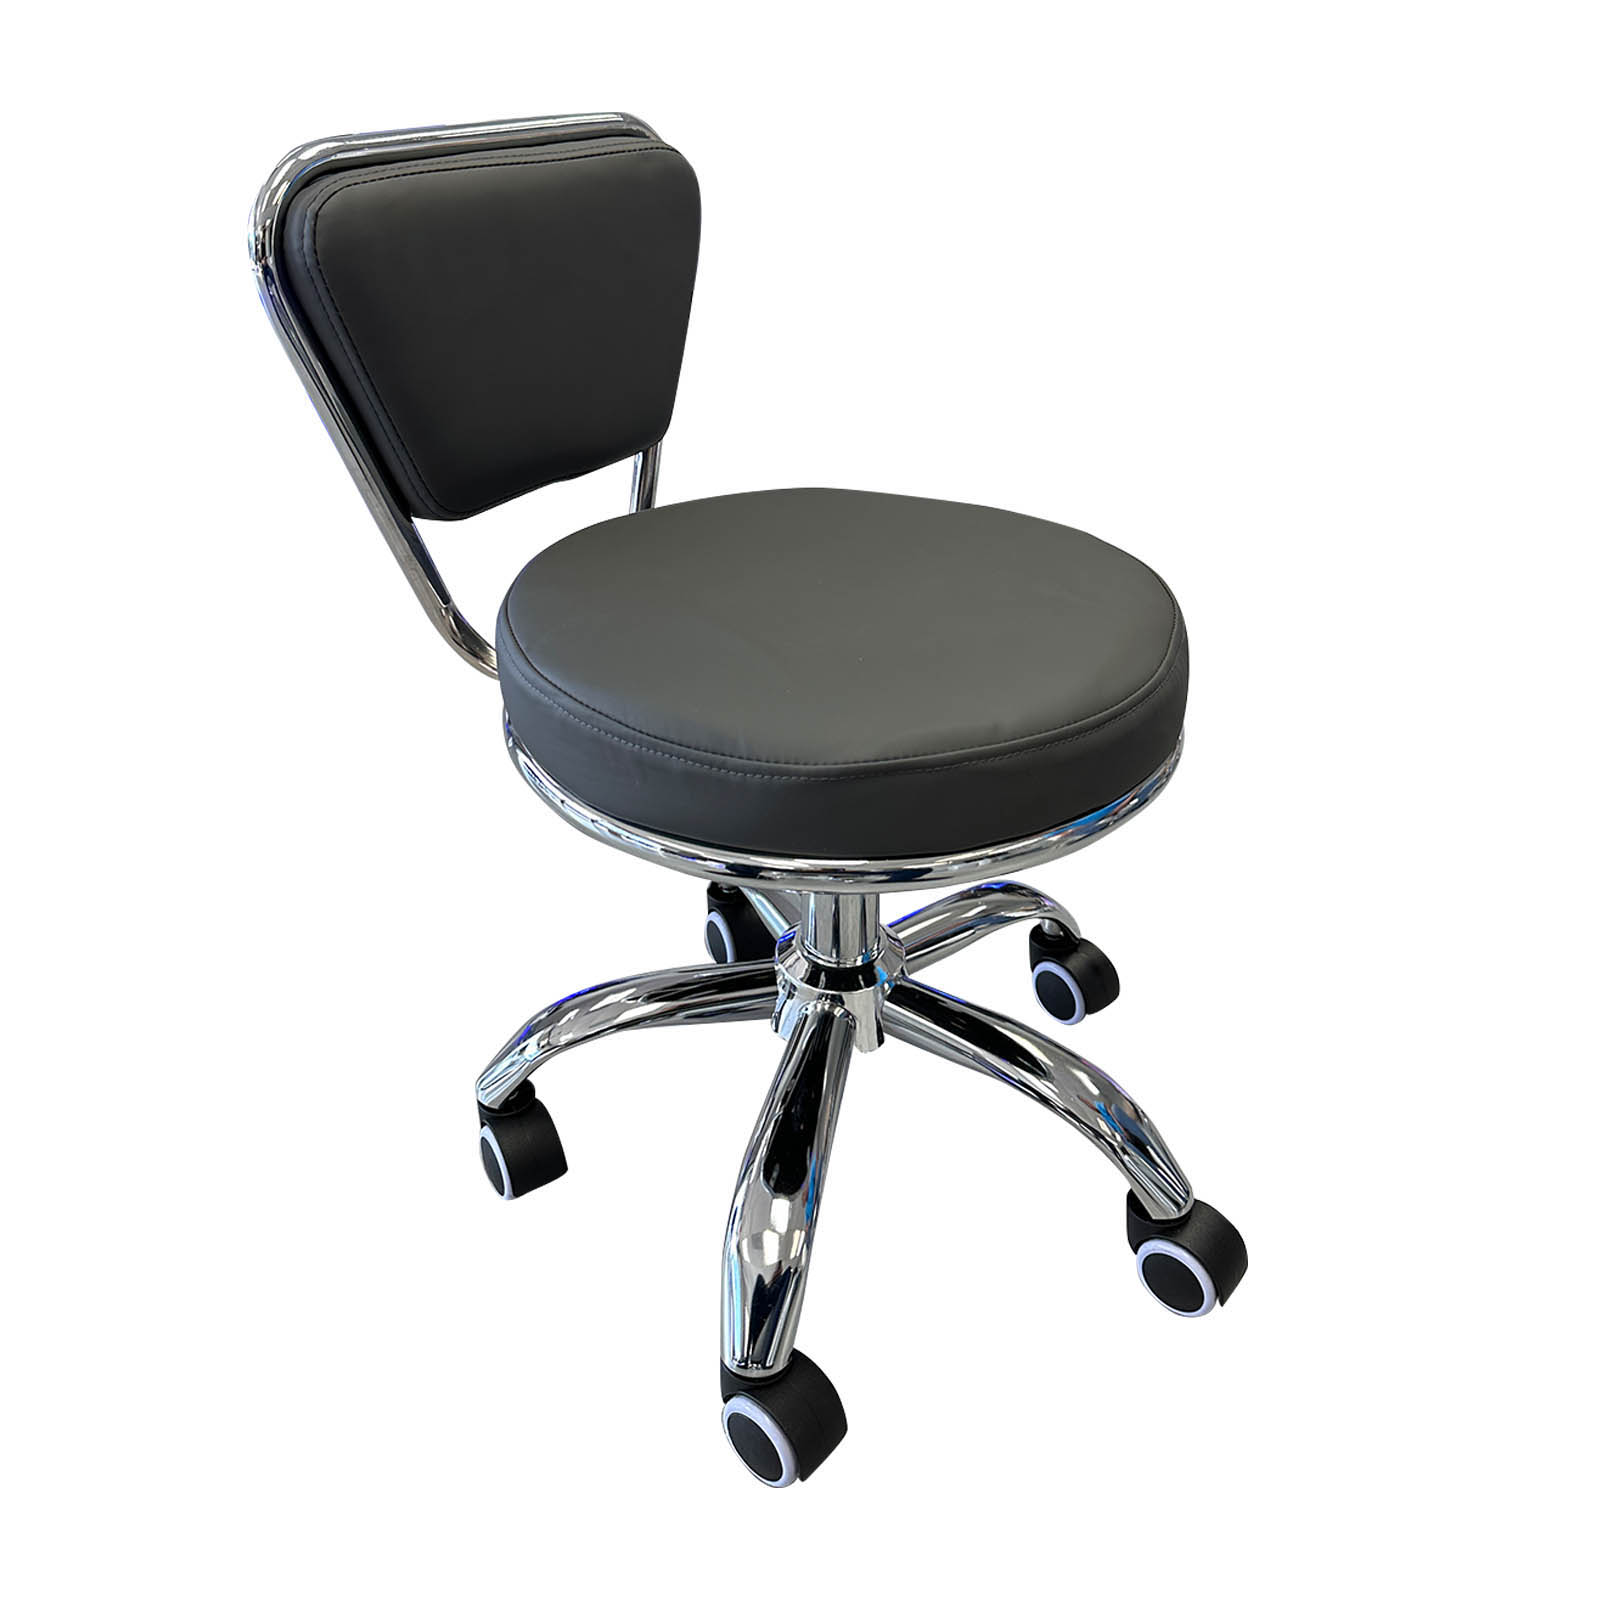 Adjustable Hydraulic Salon Chair with Backrest and Rolling Feature for Nail Salon, Spa, or Beauty Studio